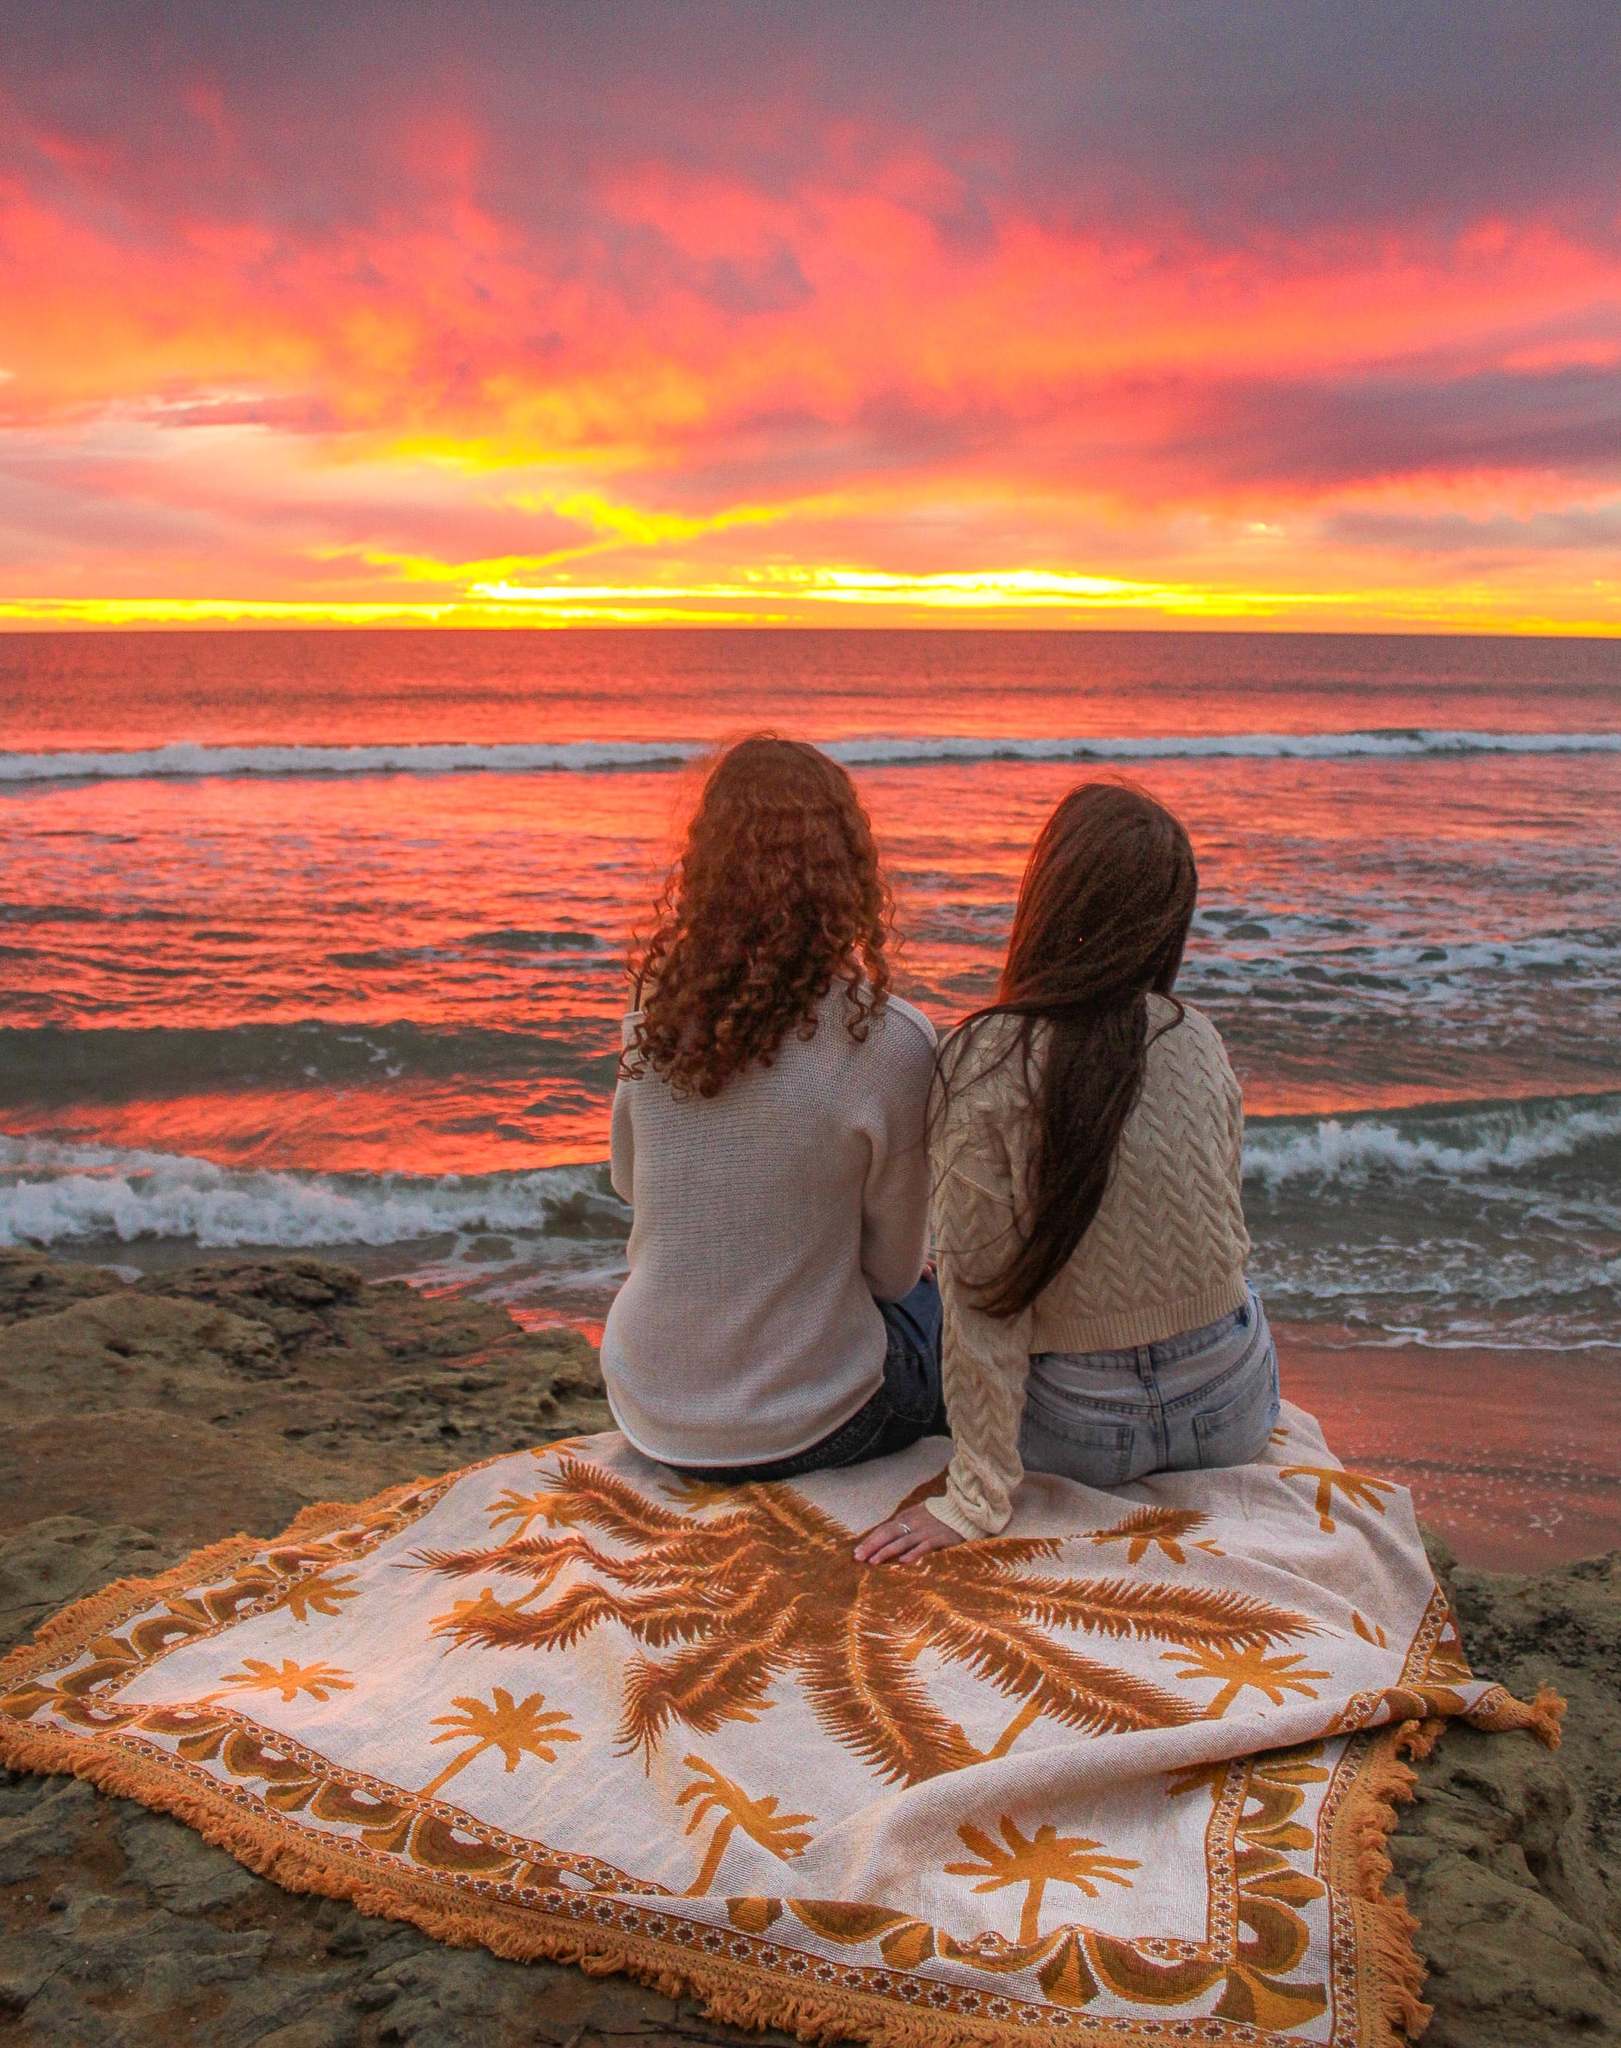 Endless Summer throw rug on rocks by the ocean, two girls sit in warm clothes looking out to orange skies as the sun sets